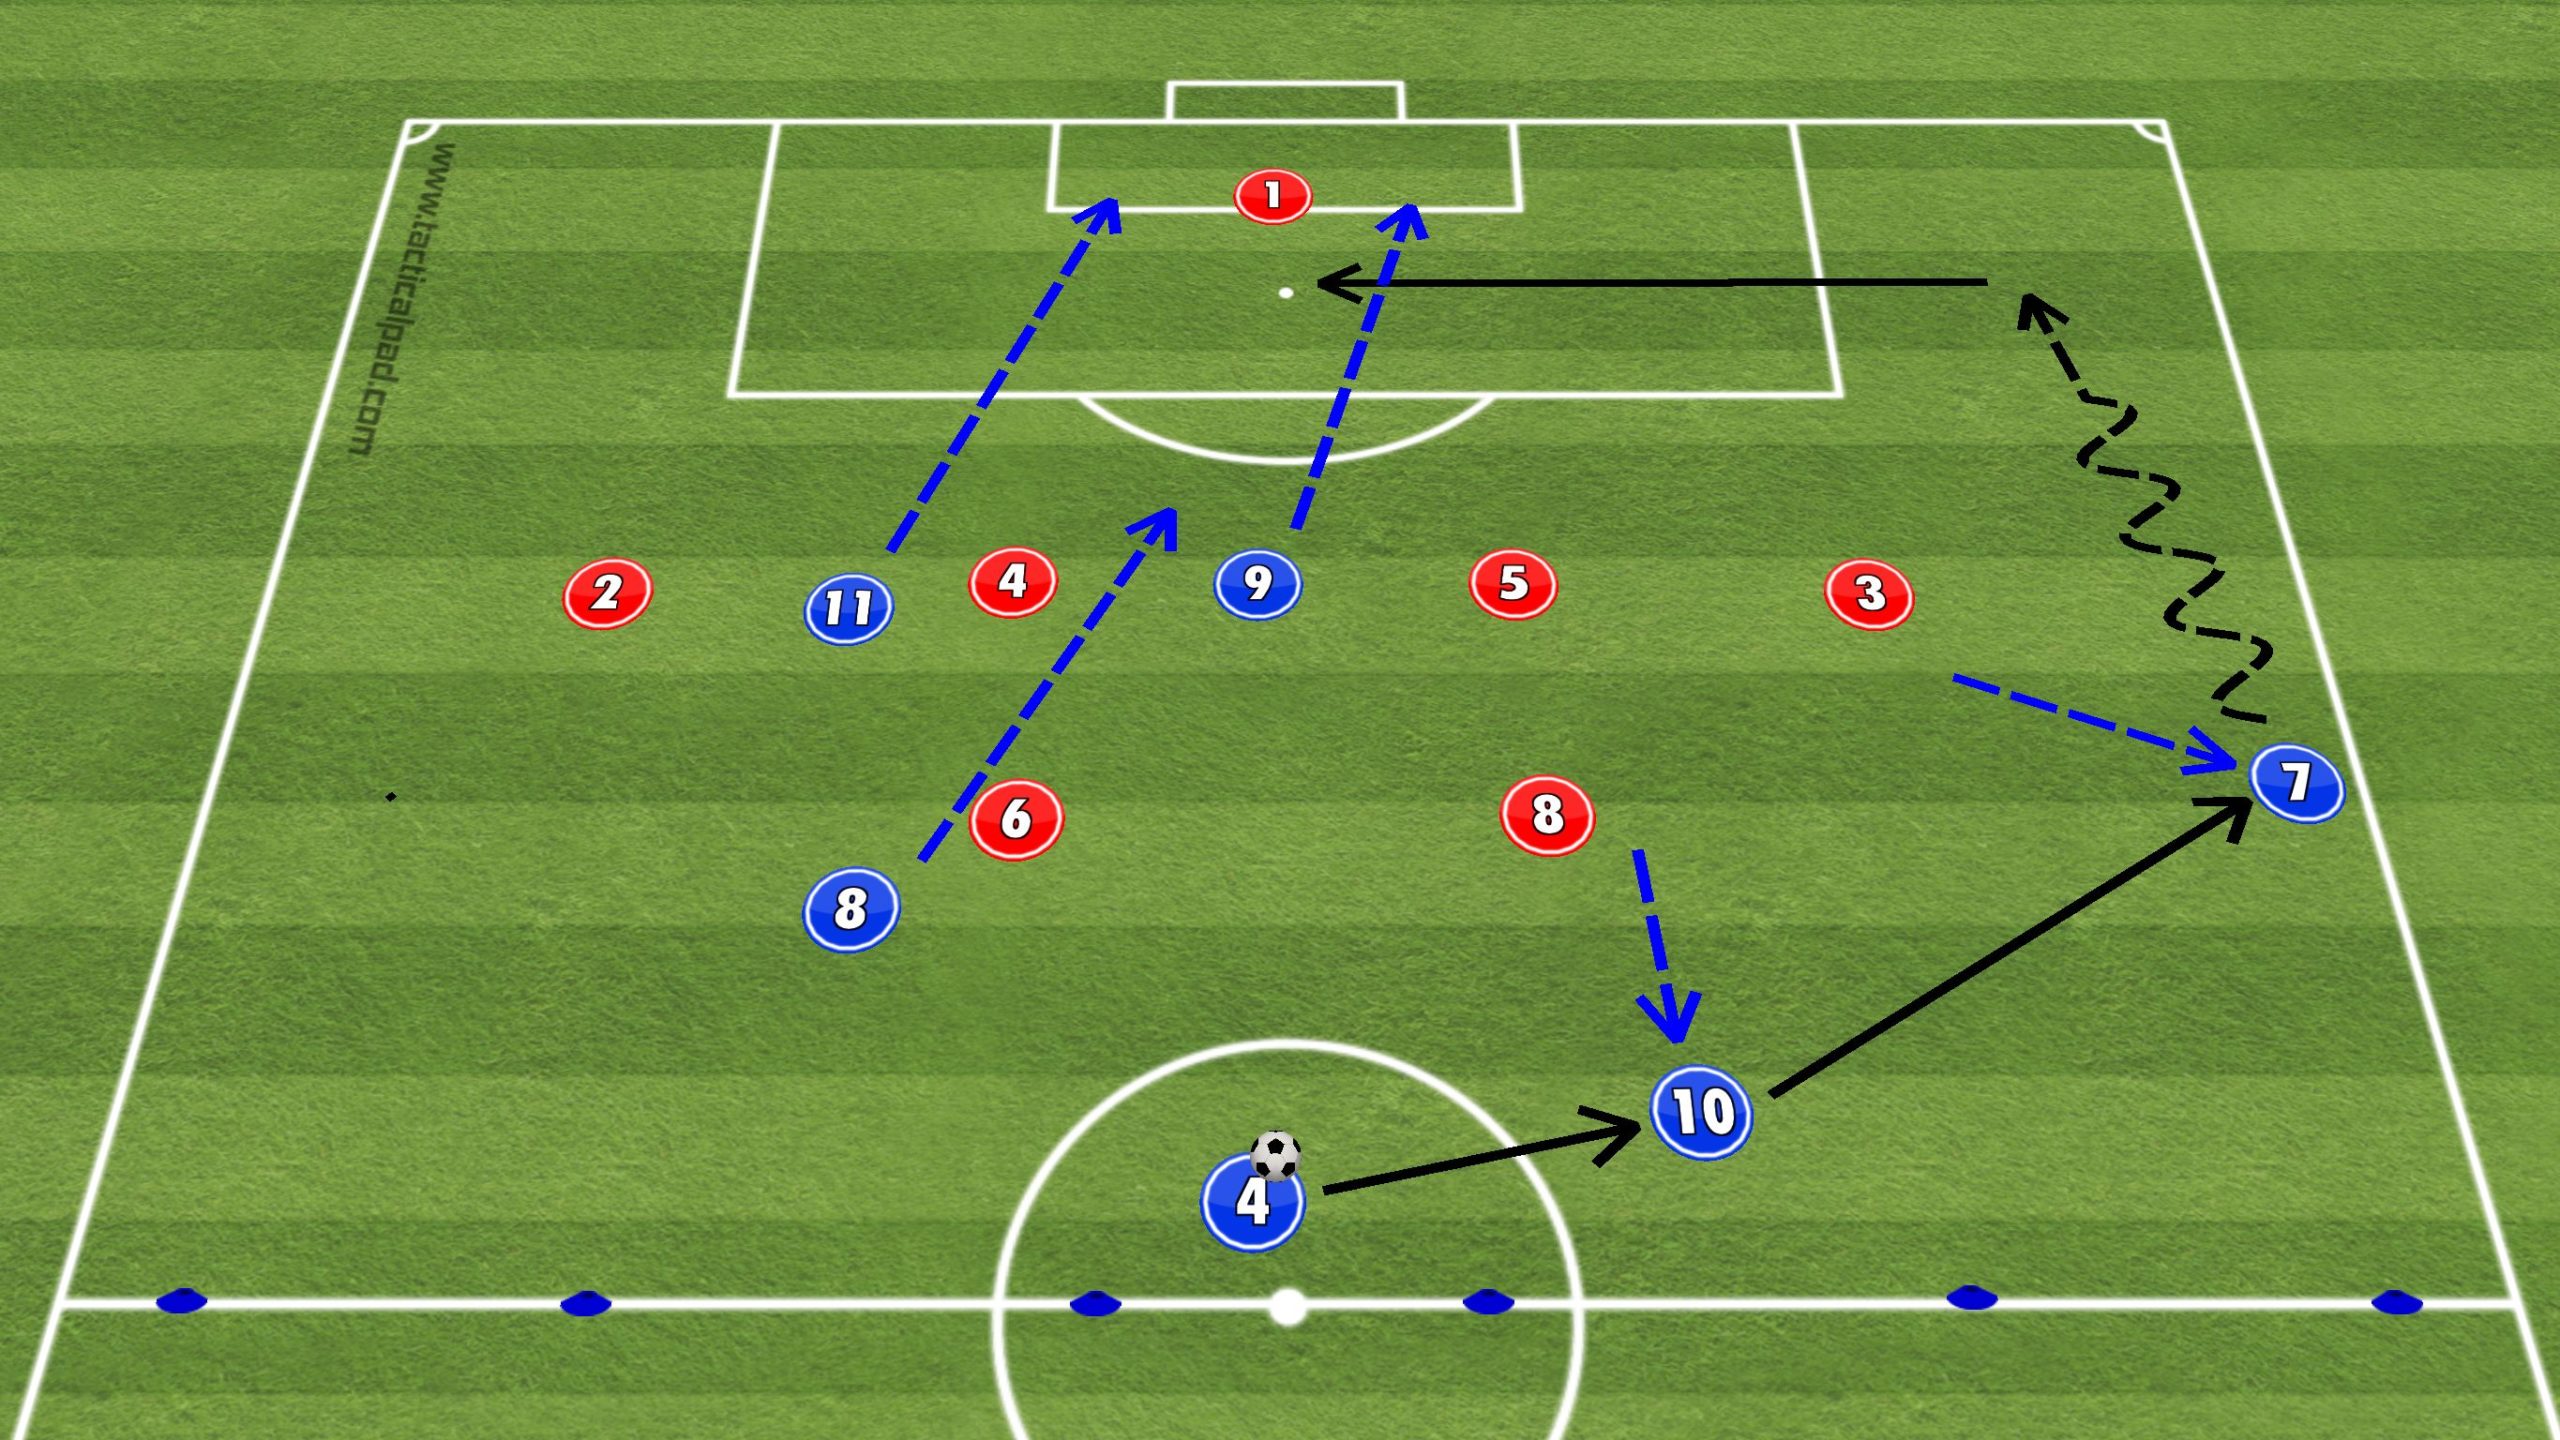 UEFA B Licence Functional Practice - Attack in Wide Areas